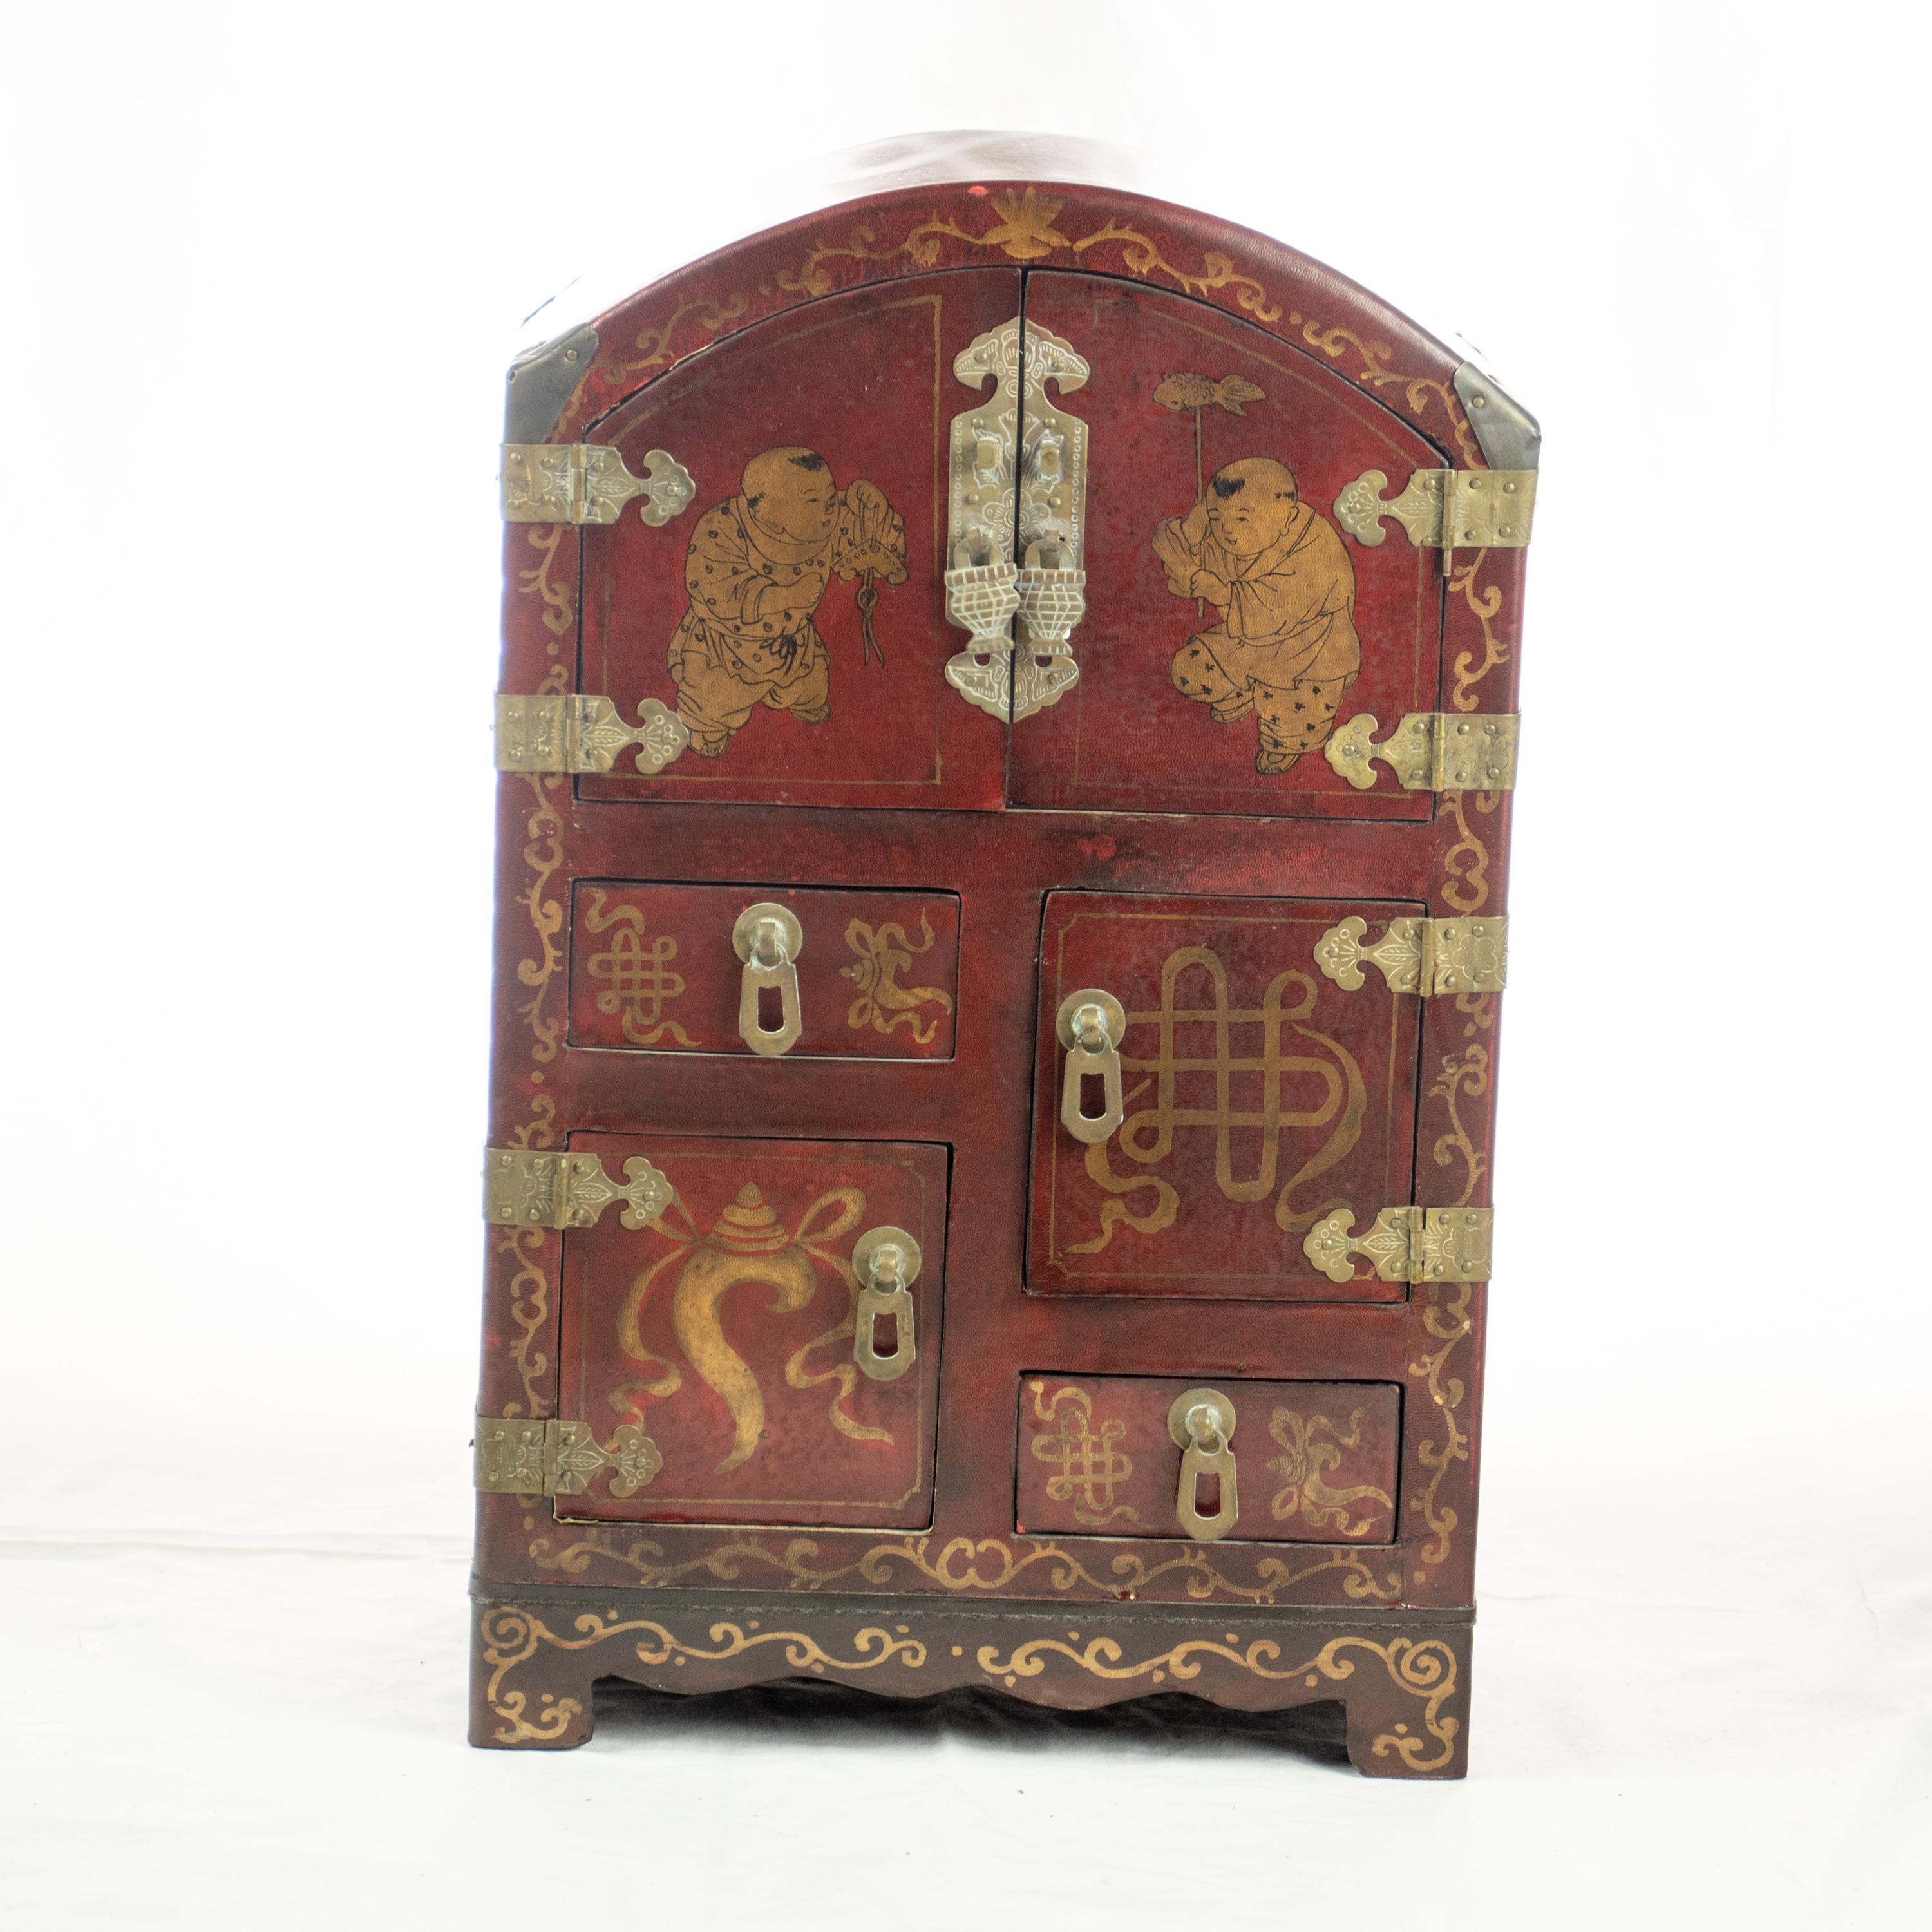 Exceptional and unique mini closet entirely made in wood, perfect to serve as a stylish and design jewelry box organizer. Perfect as house ornaments, hand painted on wood. Good conditions, as the items have been preserved in a Private Museum. With a